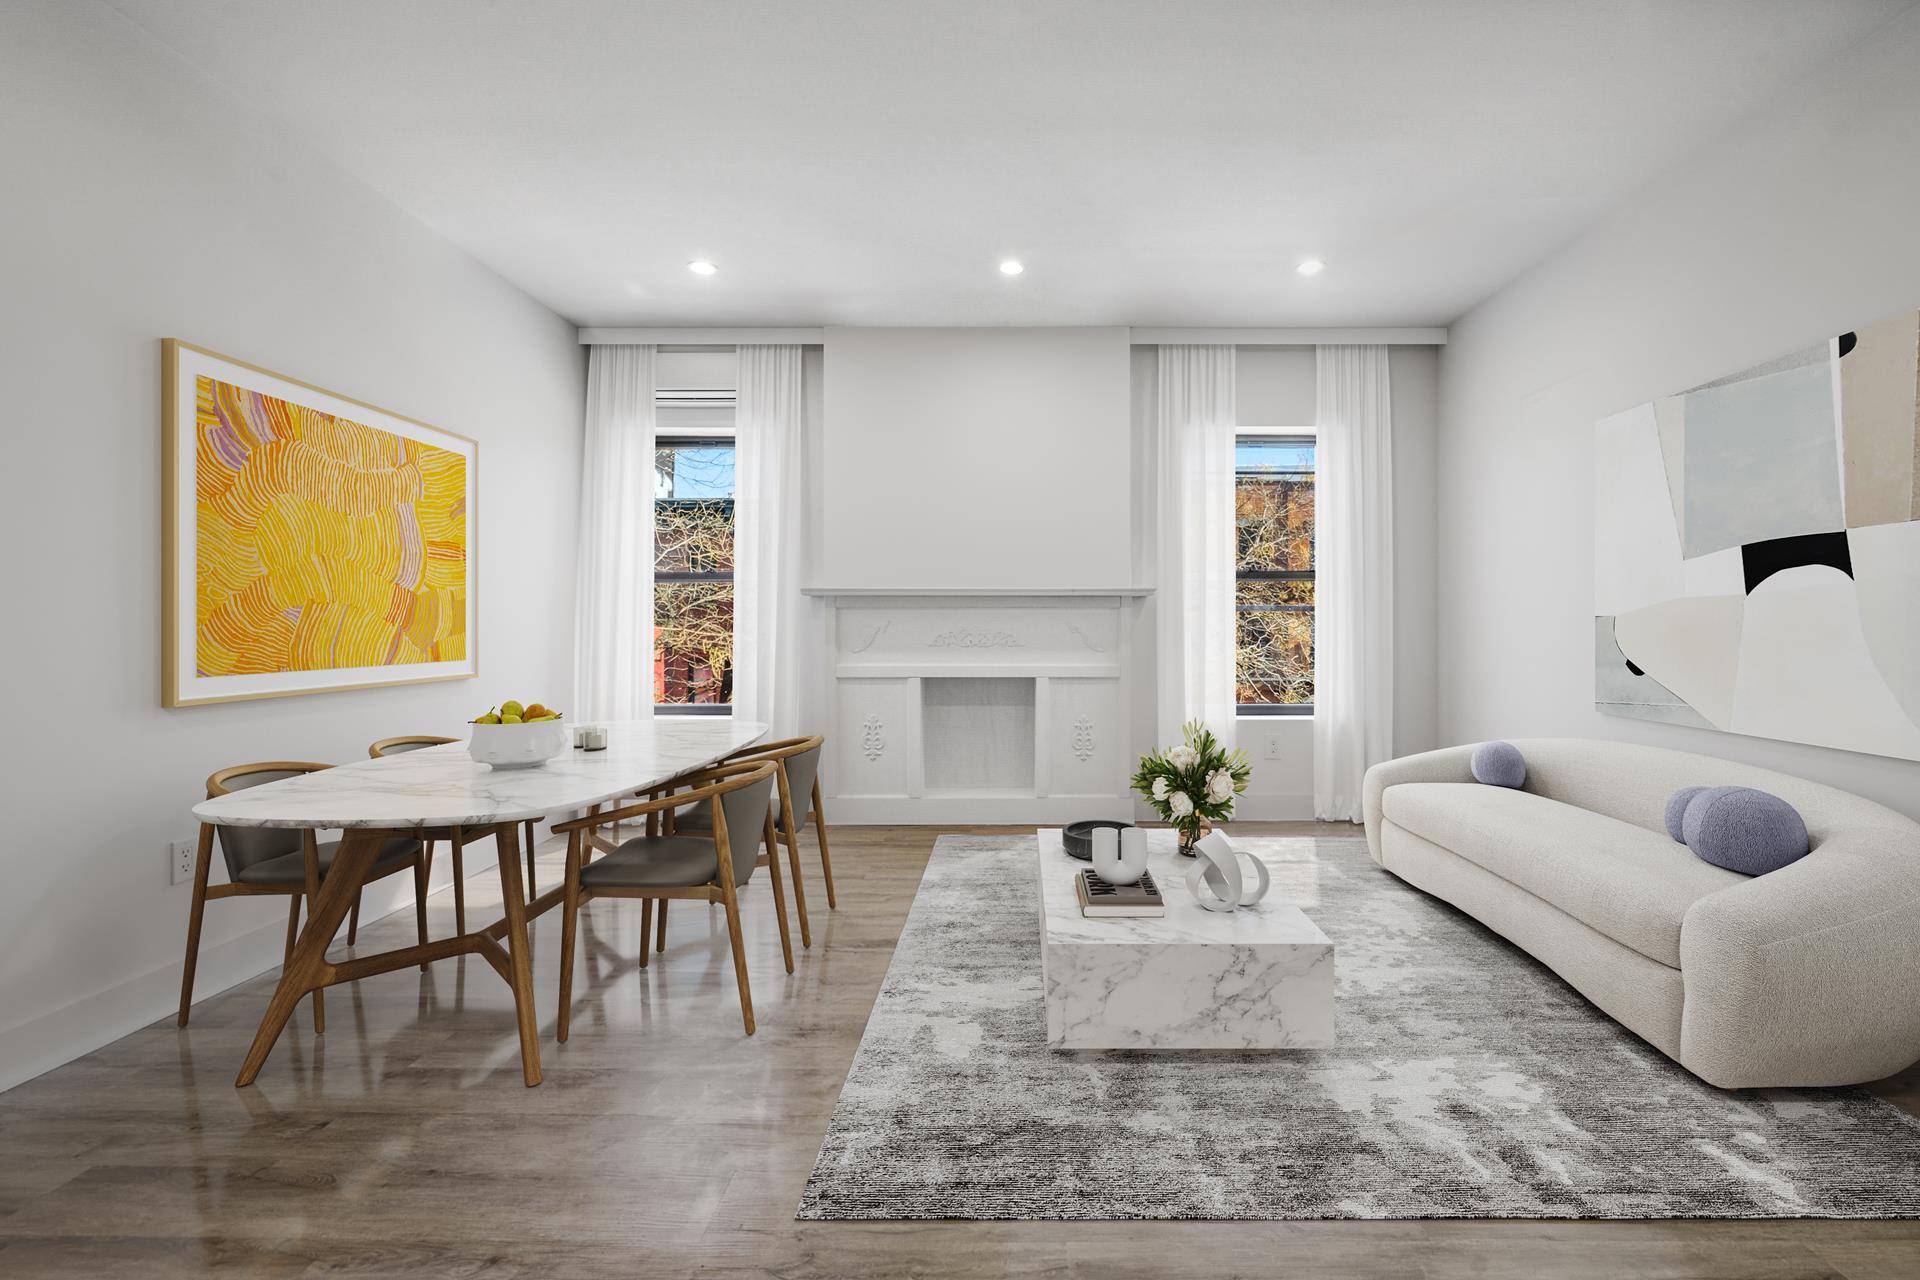 69 Lafayette Avenue is a collection of four brand new, fully renovated luxury rentals in the sought after Fort Greene neighborhood of Brooklyn.